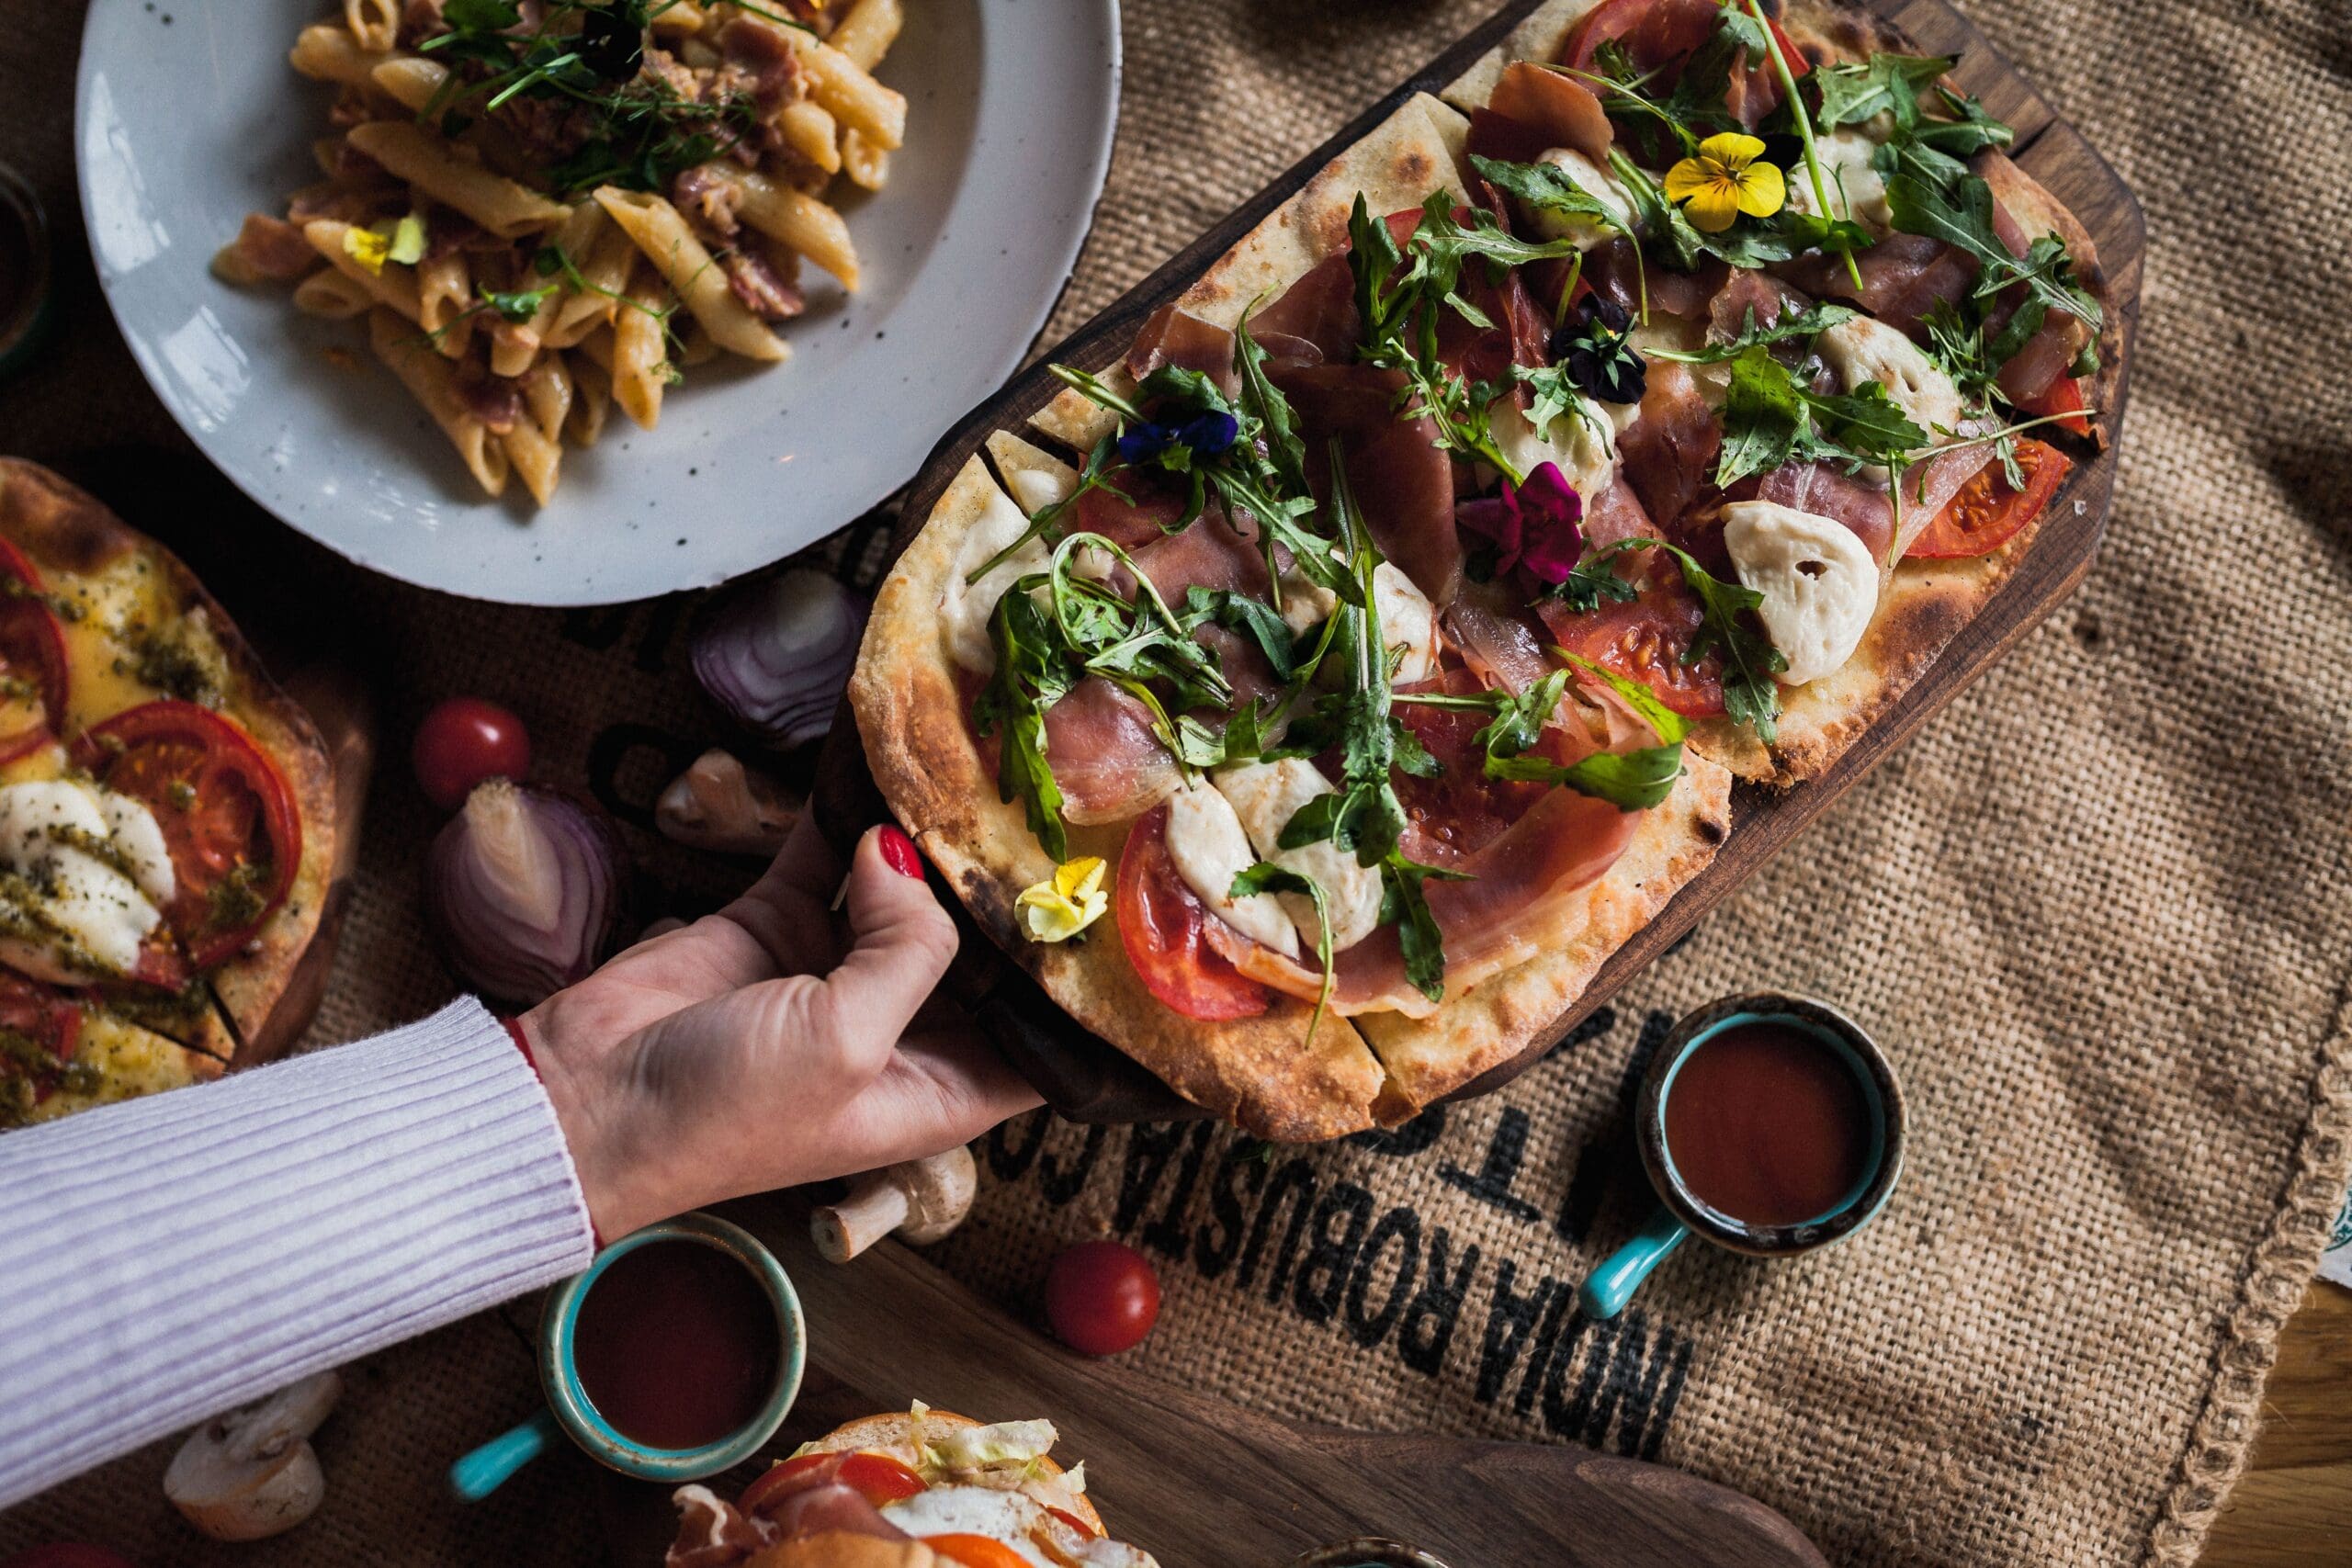 Best Pizza and Pasta in Rockwall | Mogio's Gourmet Pizza